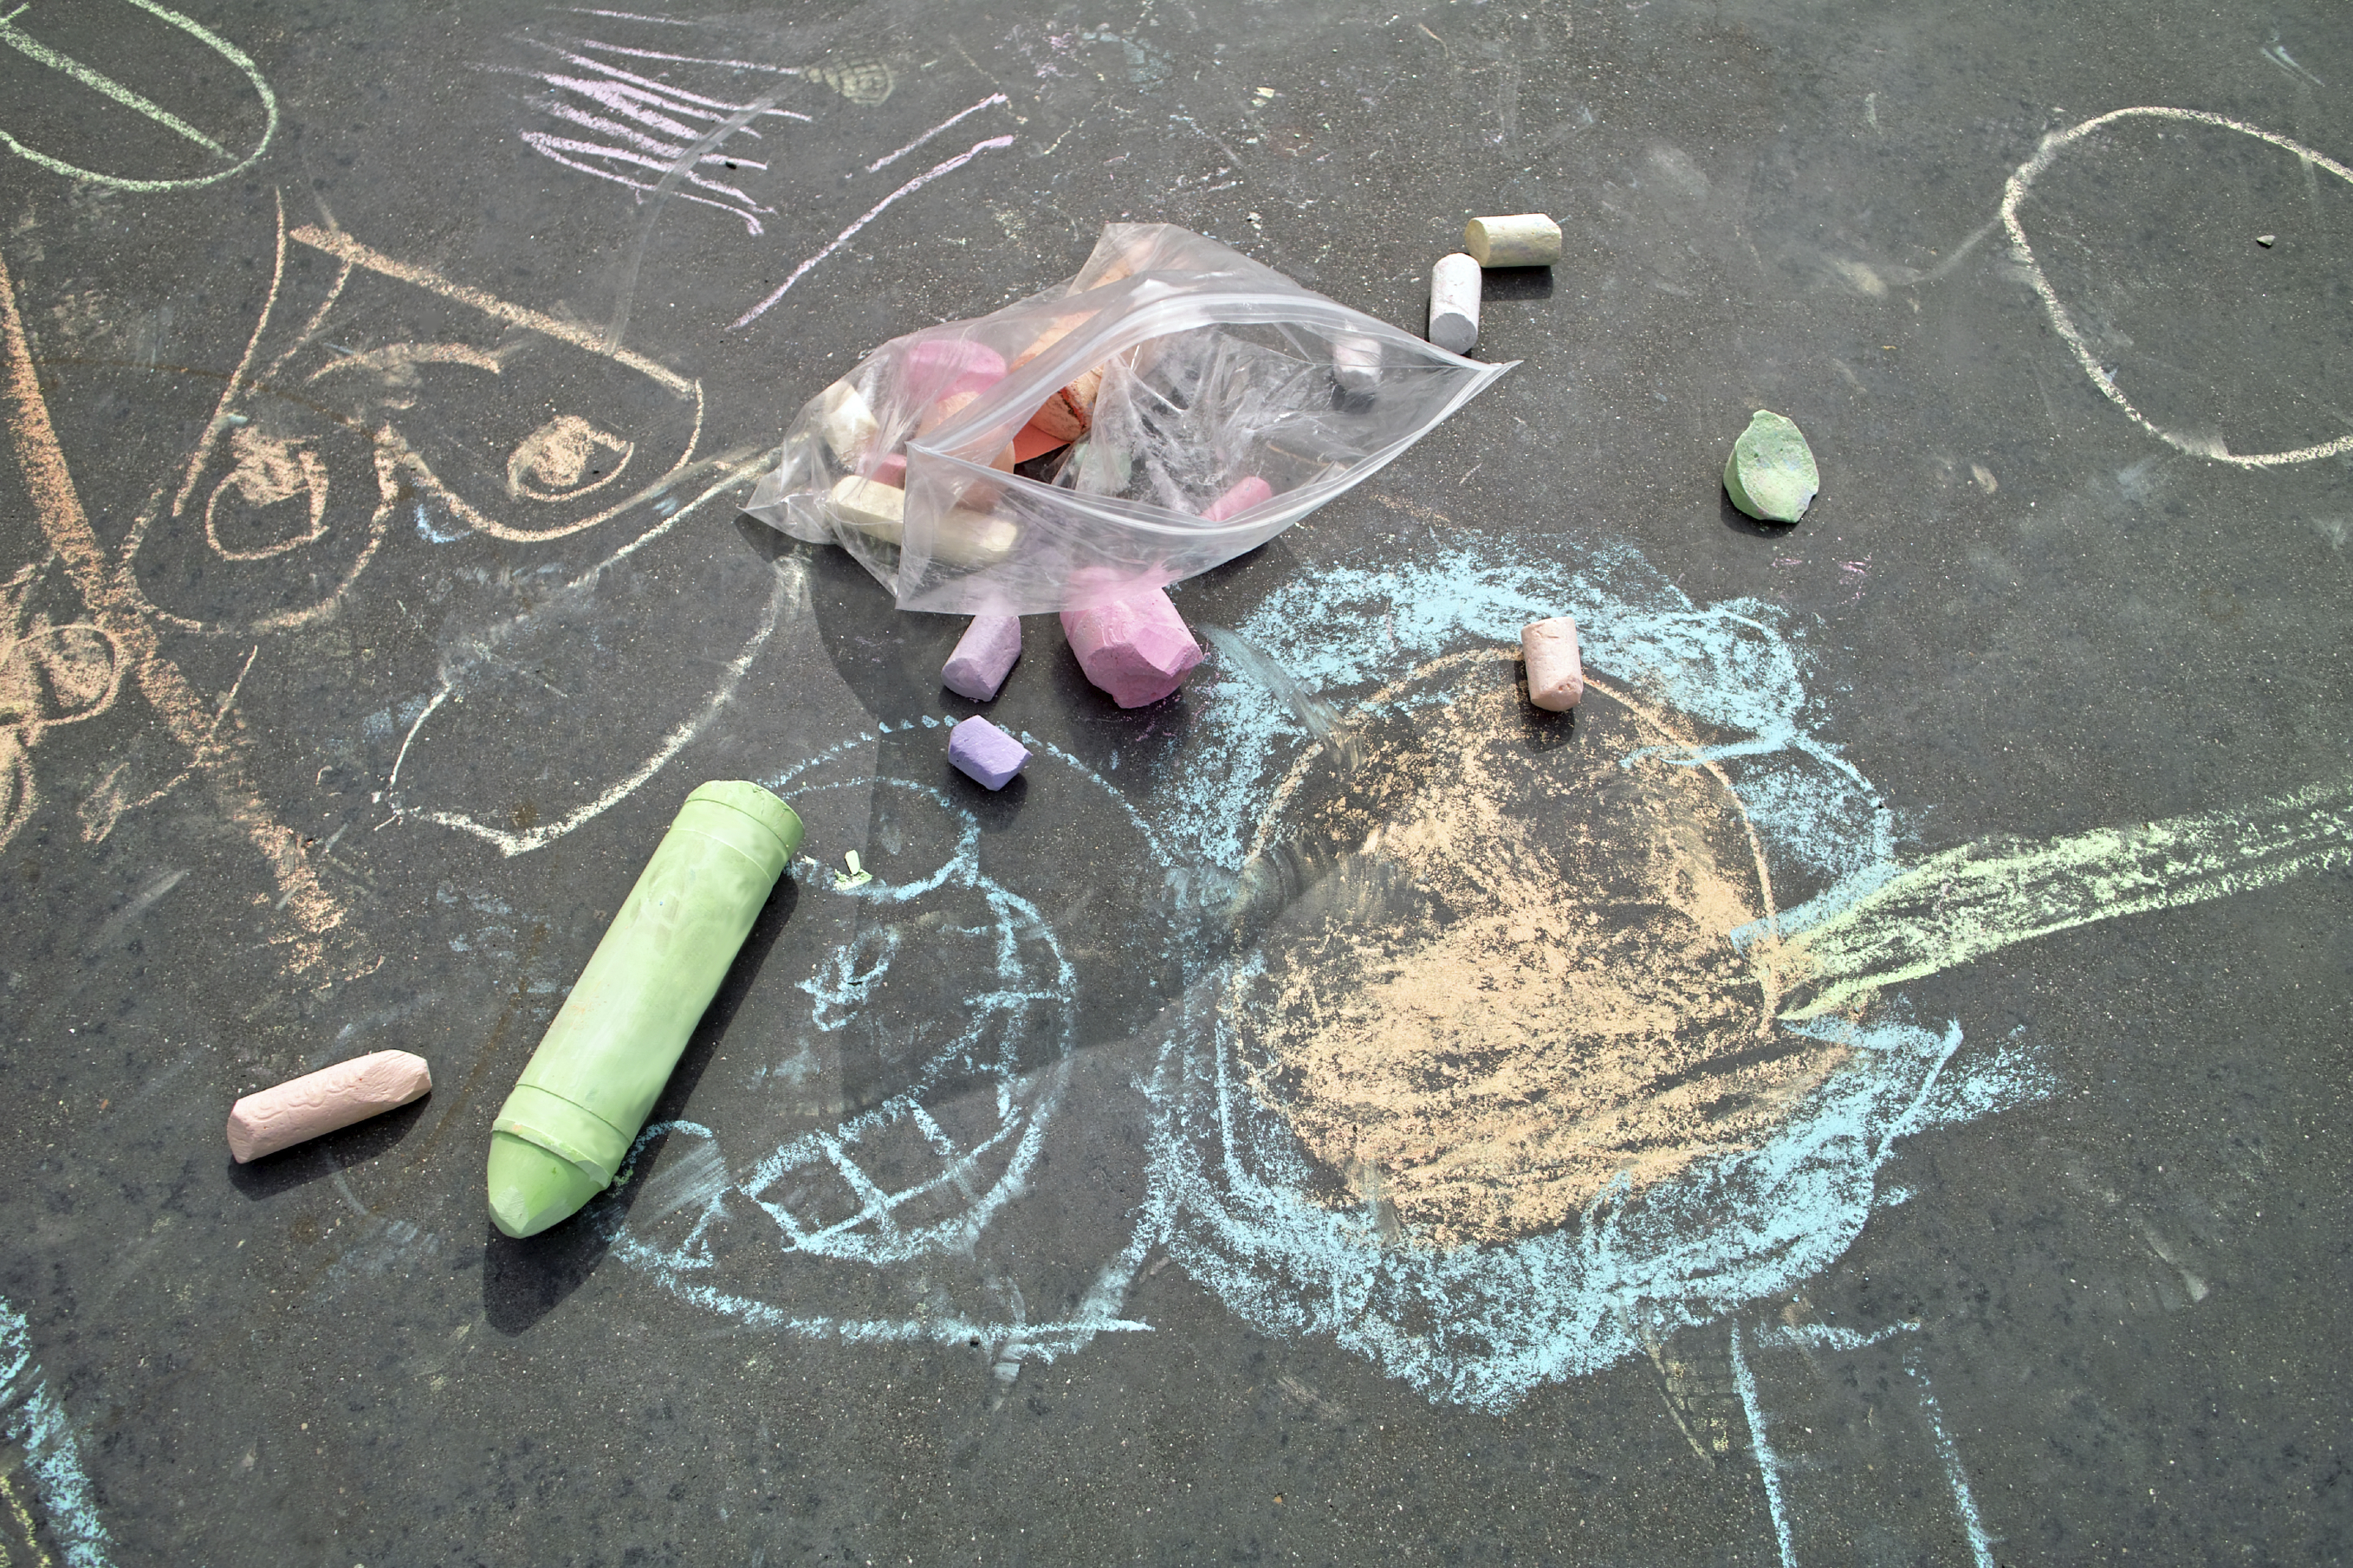 Get Creative: Sidewalk Chalk and Paint Art Projects Kids Will Love